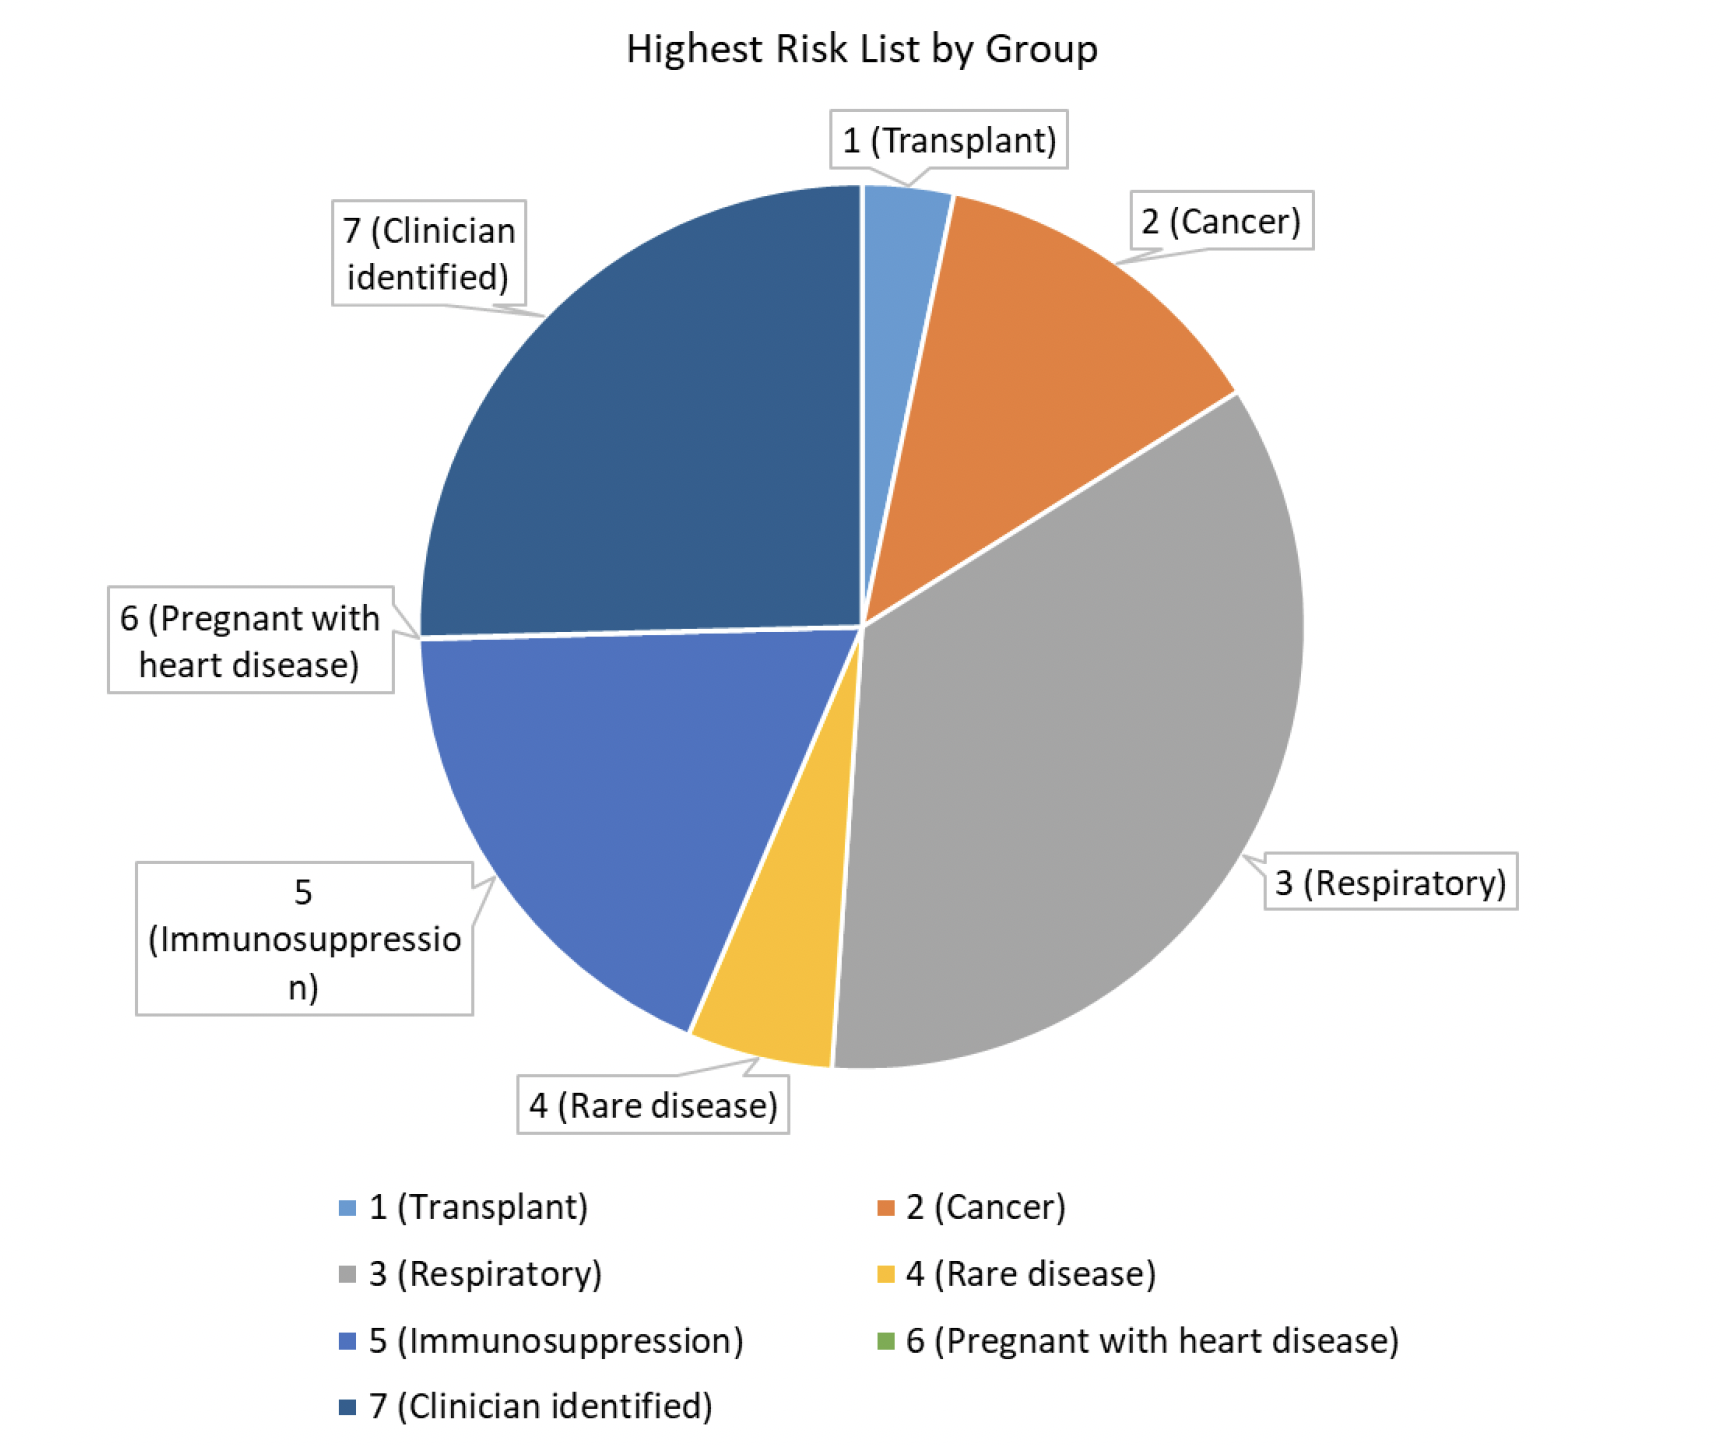 Figure 1 shows the seven groups which make up the Highest Risk List. These include transplant, cancer, respiratory, rare disease, immunosuppression, pregnant with heart disease and clinician identified. The respiratory group makes up the largest proportion of the Highest Risk List, followed by the clinician identified group and the immunosuppression group. The pregnant with heart disease group makes up the smallest proportion of the Highest Risk List. The same individual may be counted in more than one group.